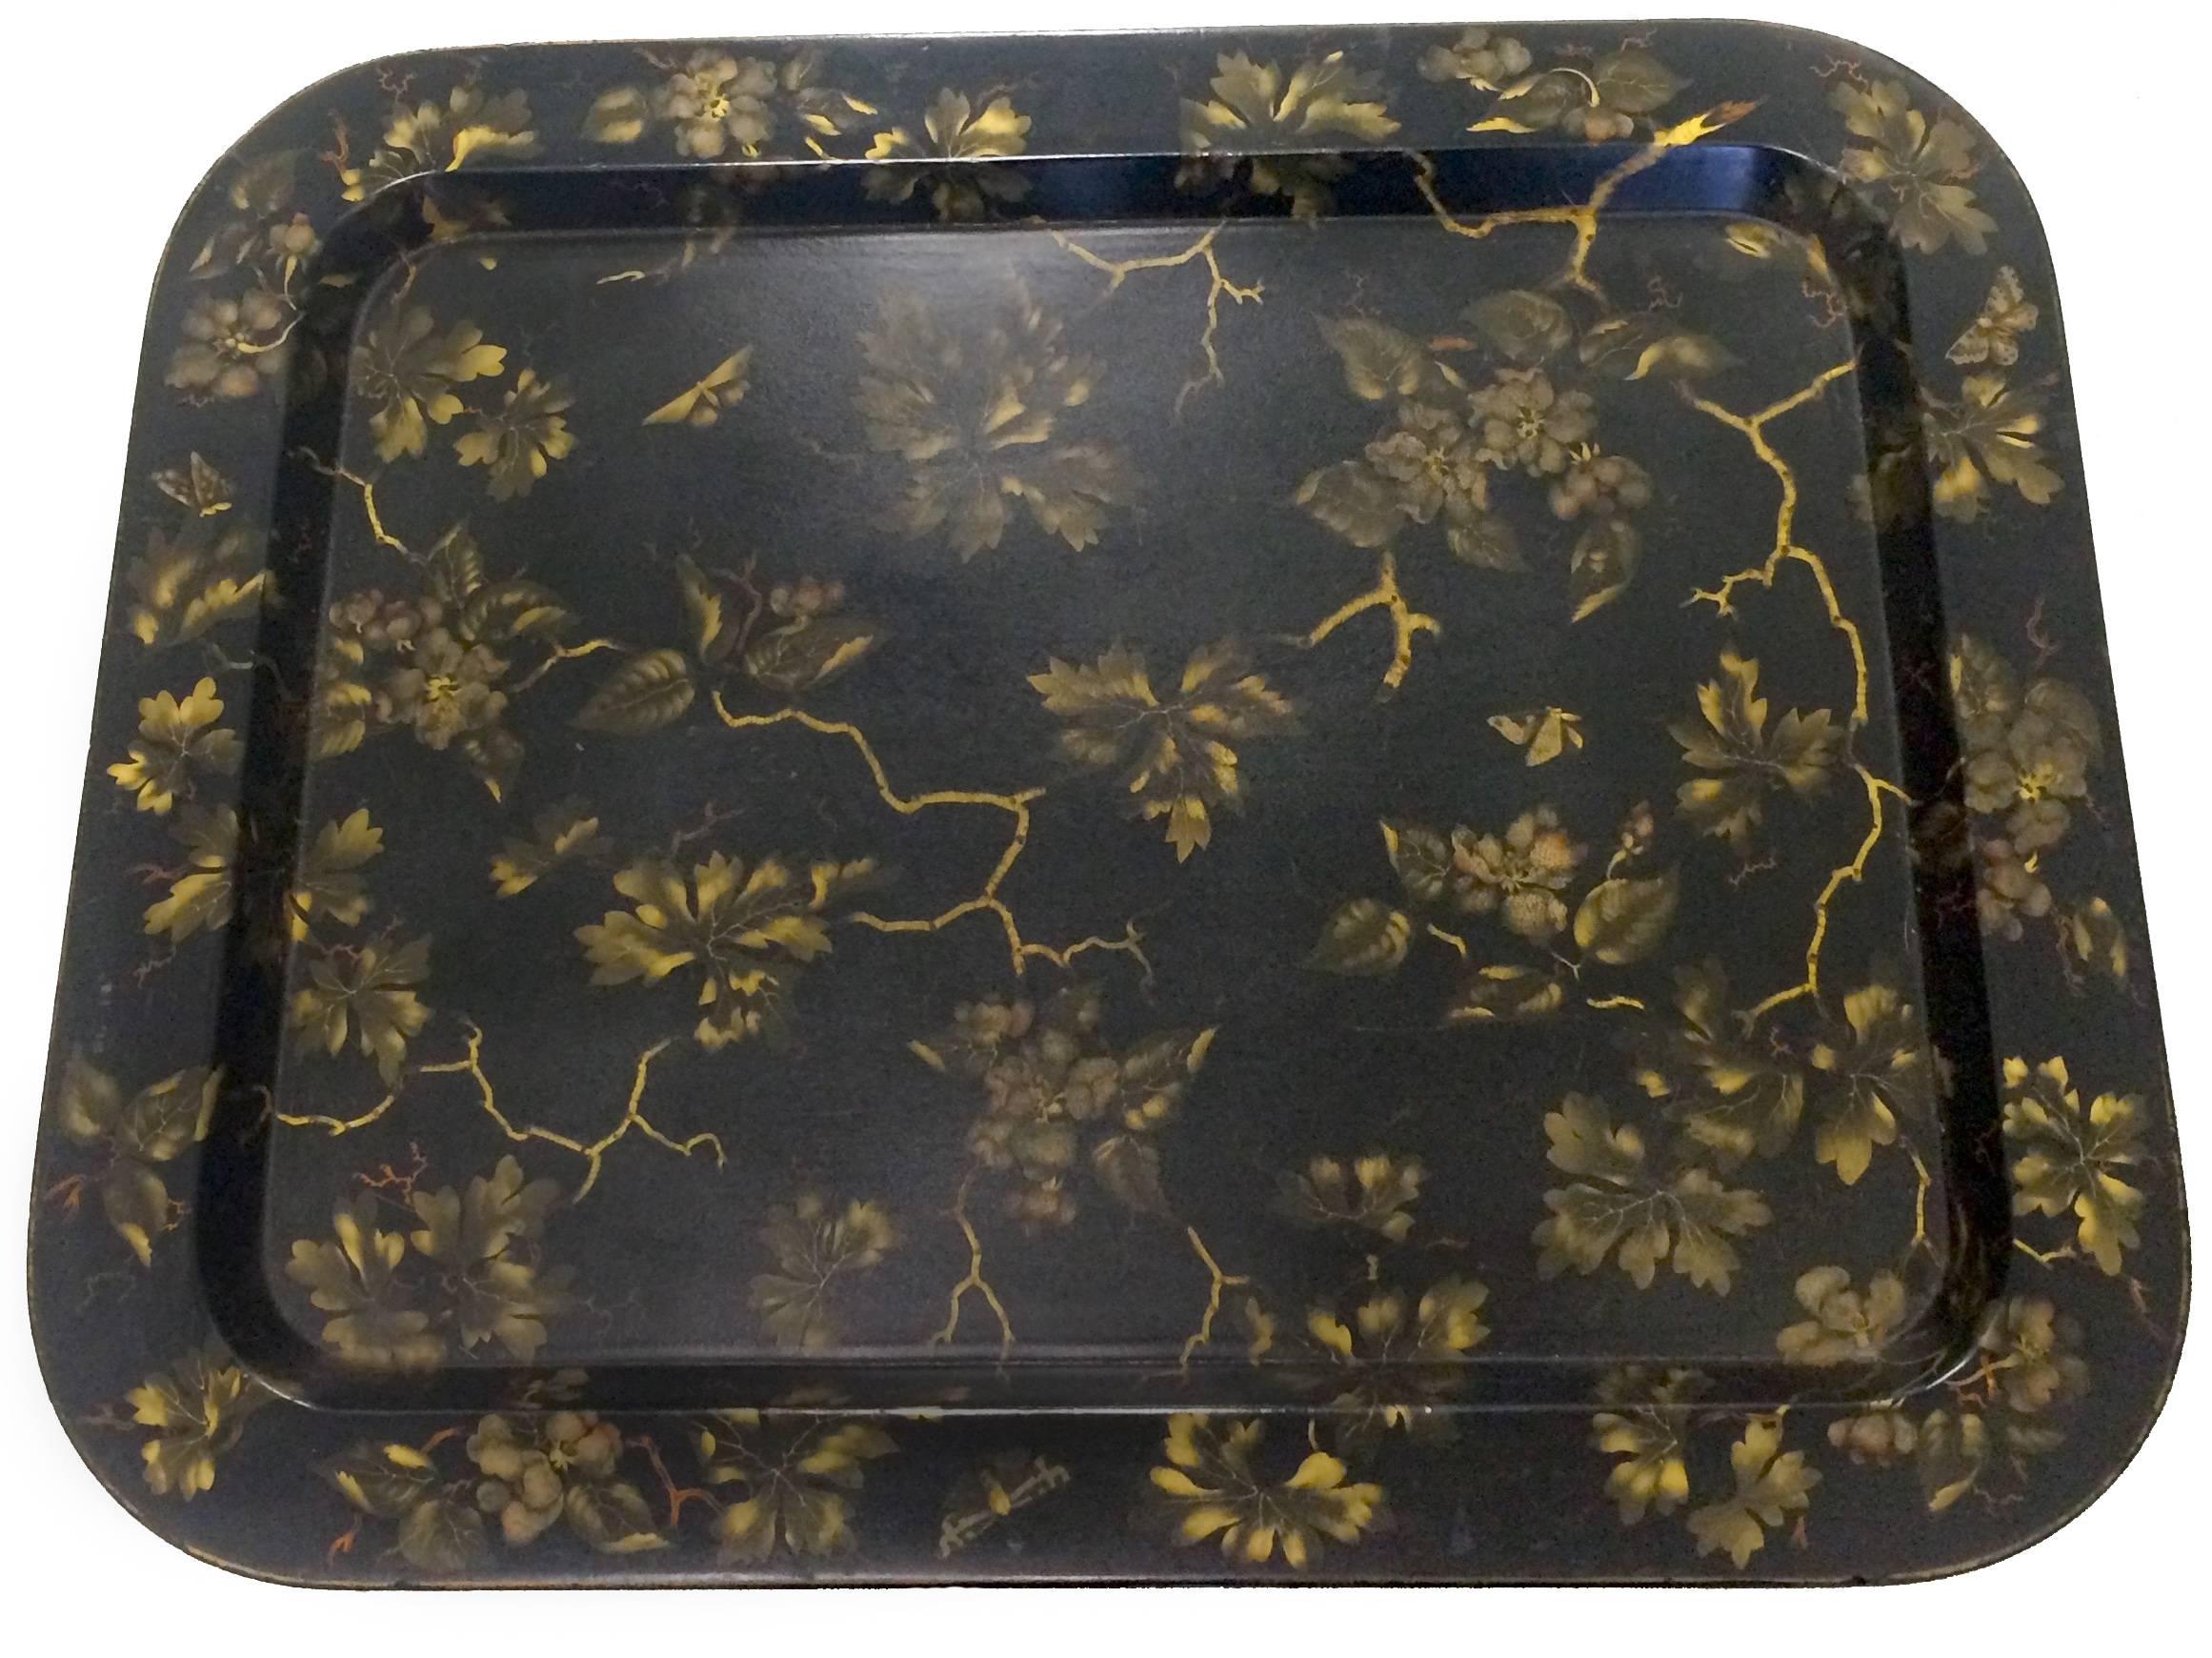 1930s English papier mâché tray table. Black and gold Chinoiserie hand-painted tray. Black bamboo style base with gold painted accents. Green felt table liner.